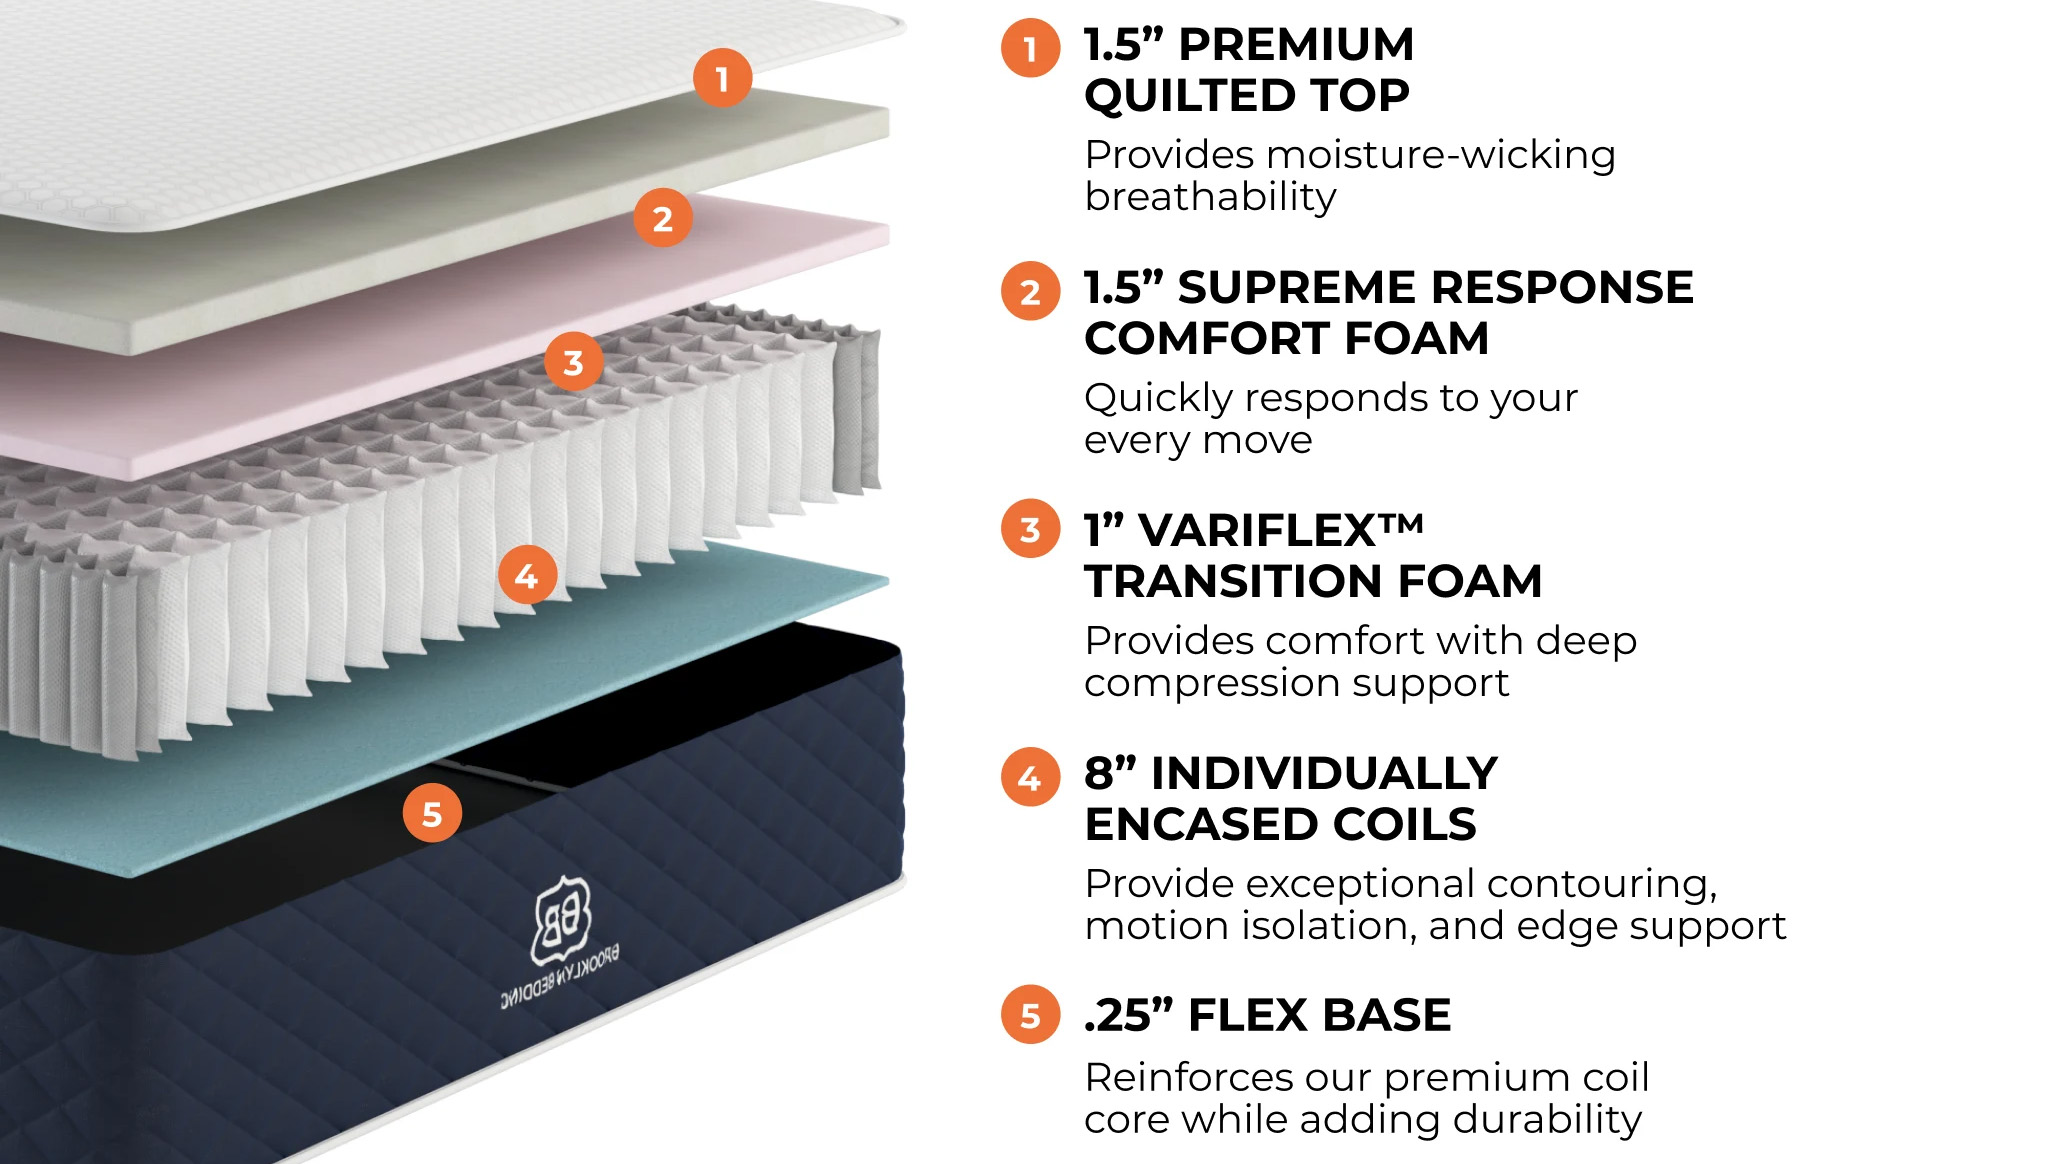 An exploded diagram showing the internal layers of the Brooklyn Bedding Signature Hybrid mattress, including layers of foam and coils